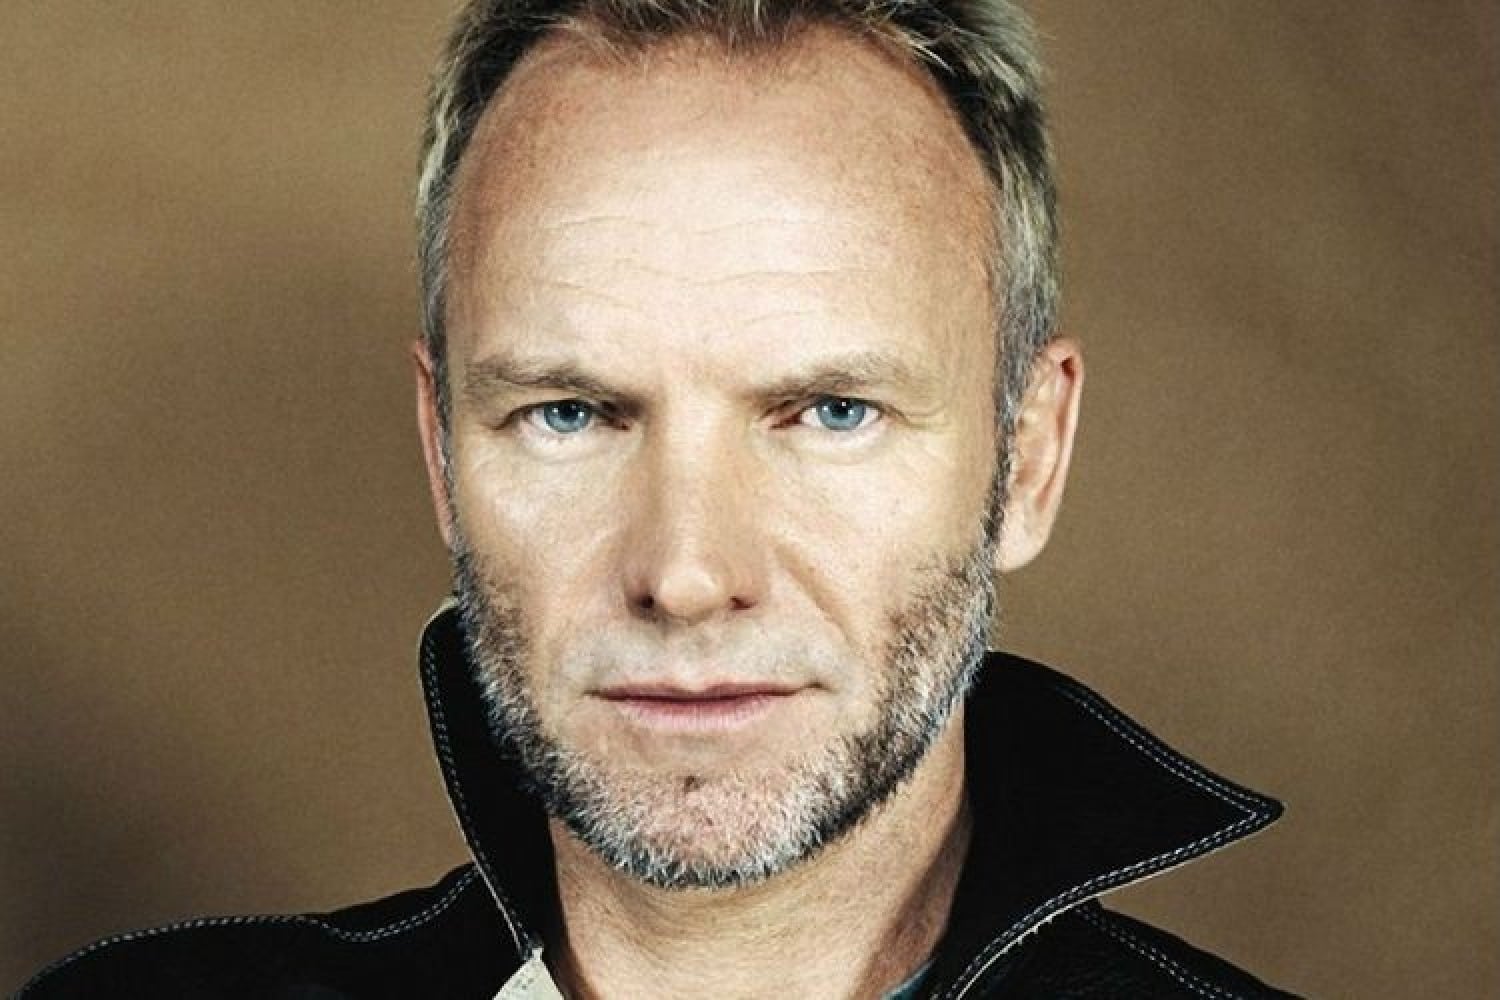 “My Songs tour”: Sting in concerto a Milano il prossimo autunno